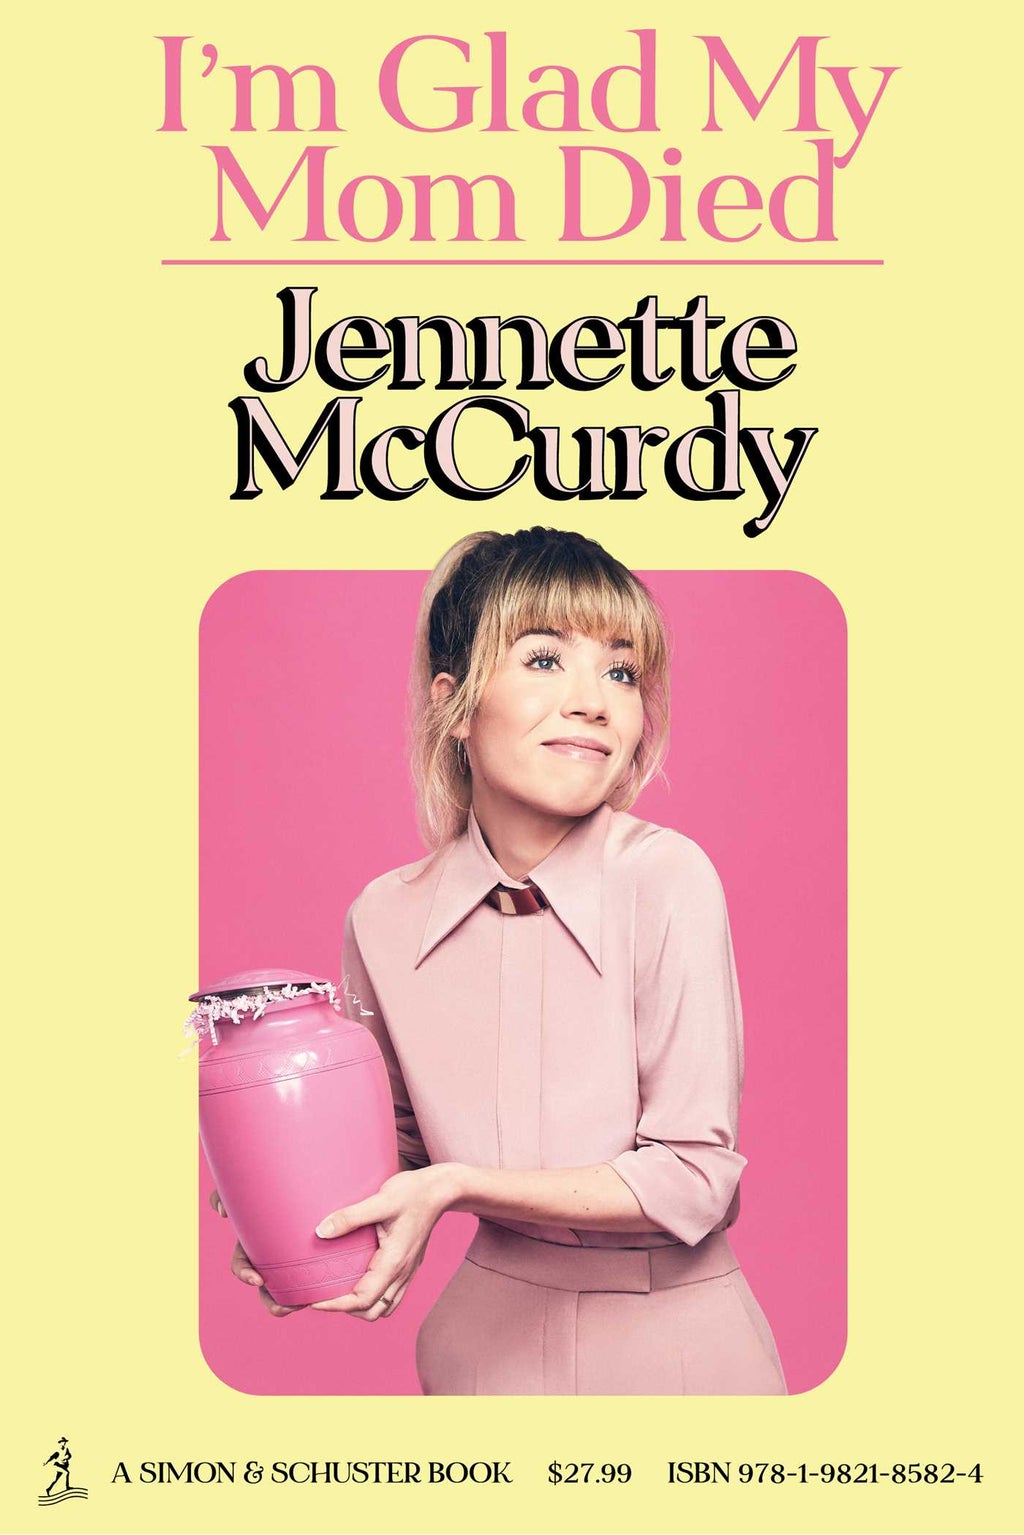 I’m glad my mom died by Jenette McCurdy book cover